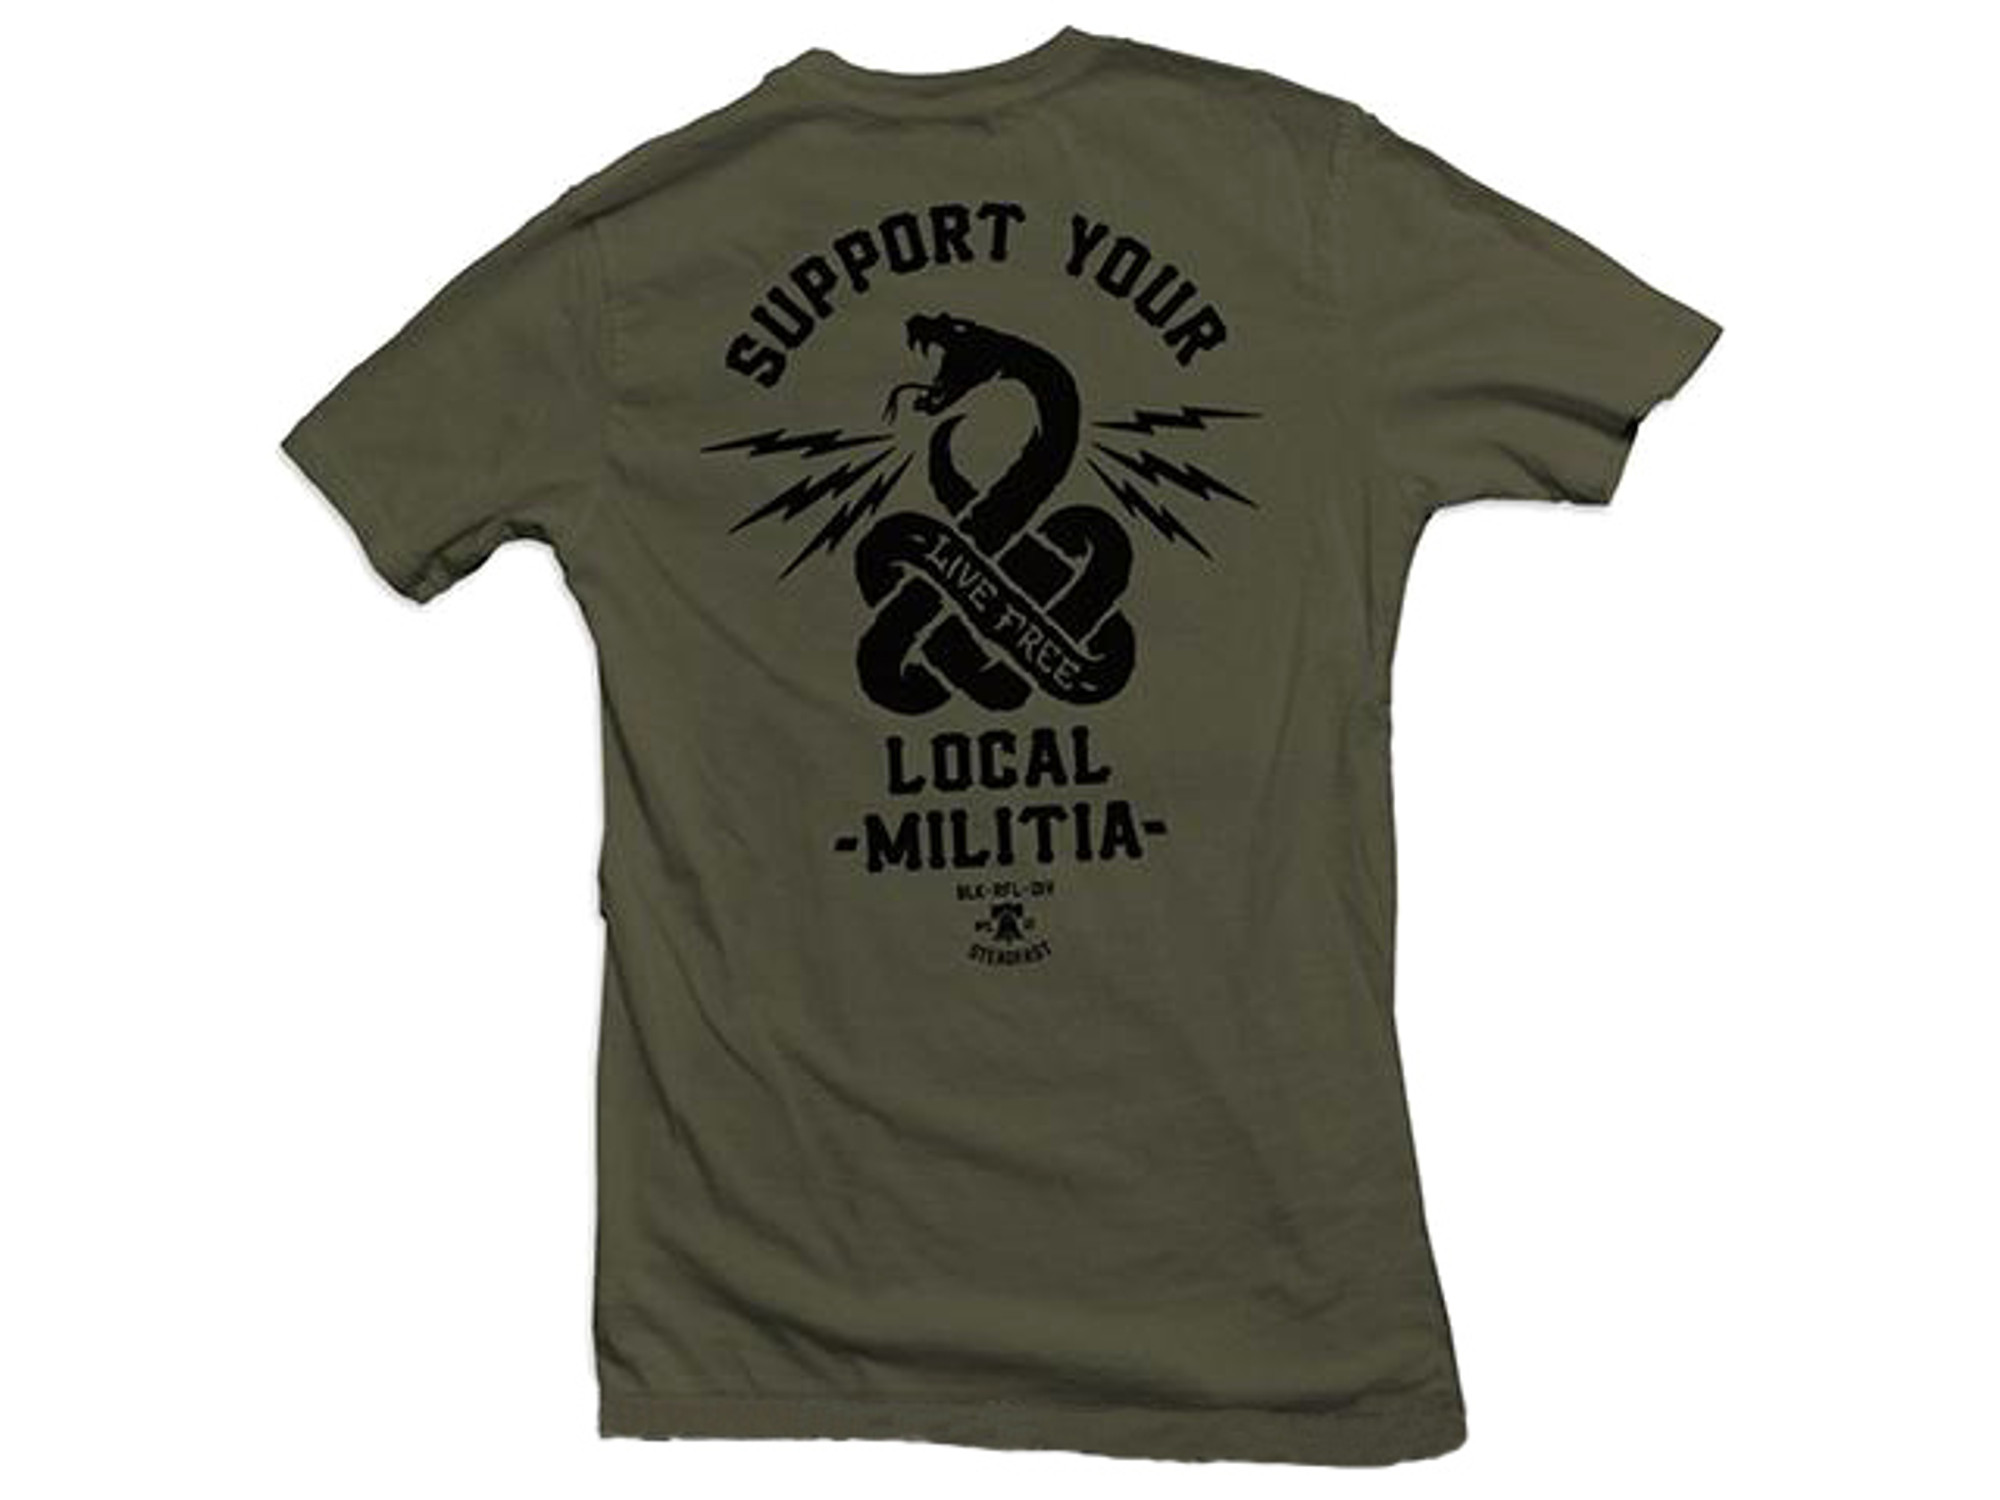 Black Rifle Division "Support your local militia" T-shirt - Military Green